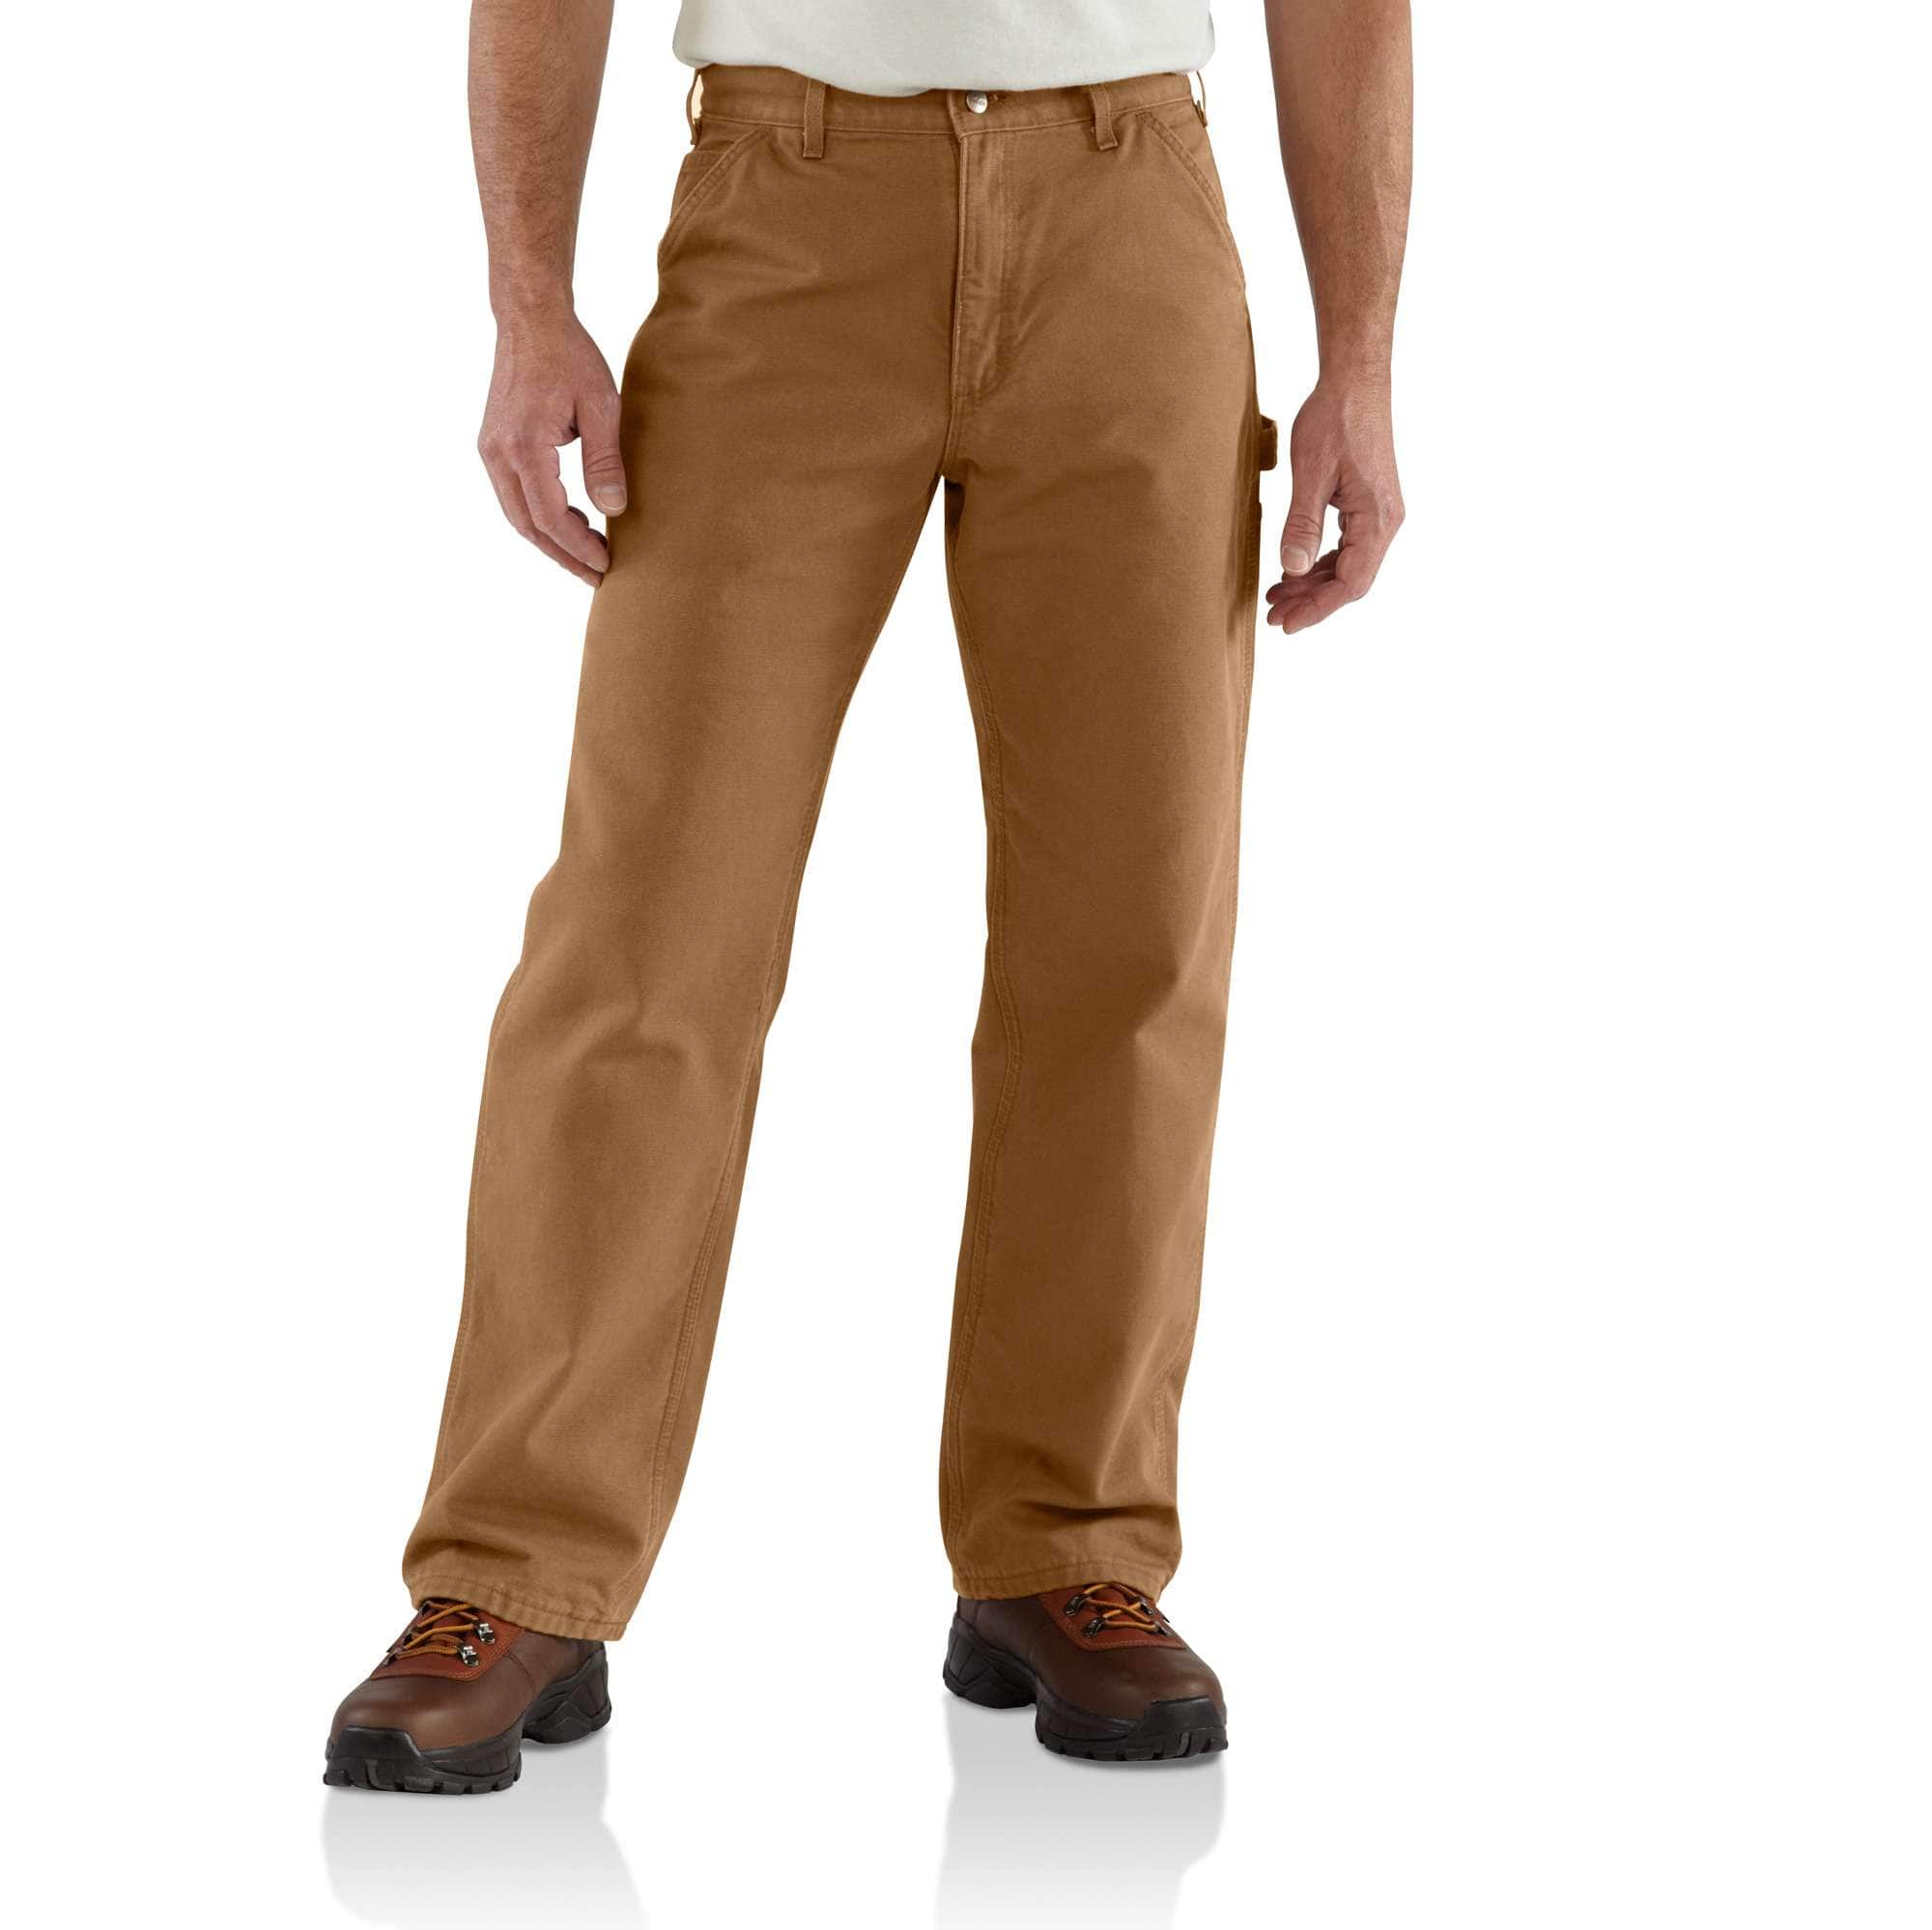 Loose Fit Washed Duck Flannel-Lined Utility Work Pant, Men's Loose Fit  Pants & Shorts